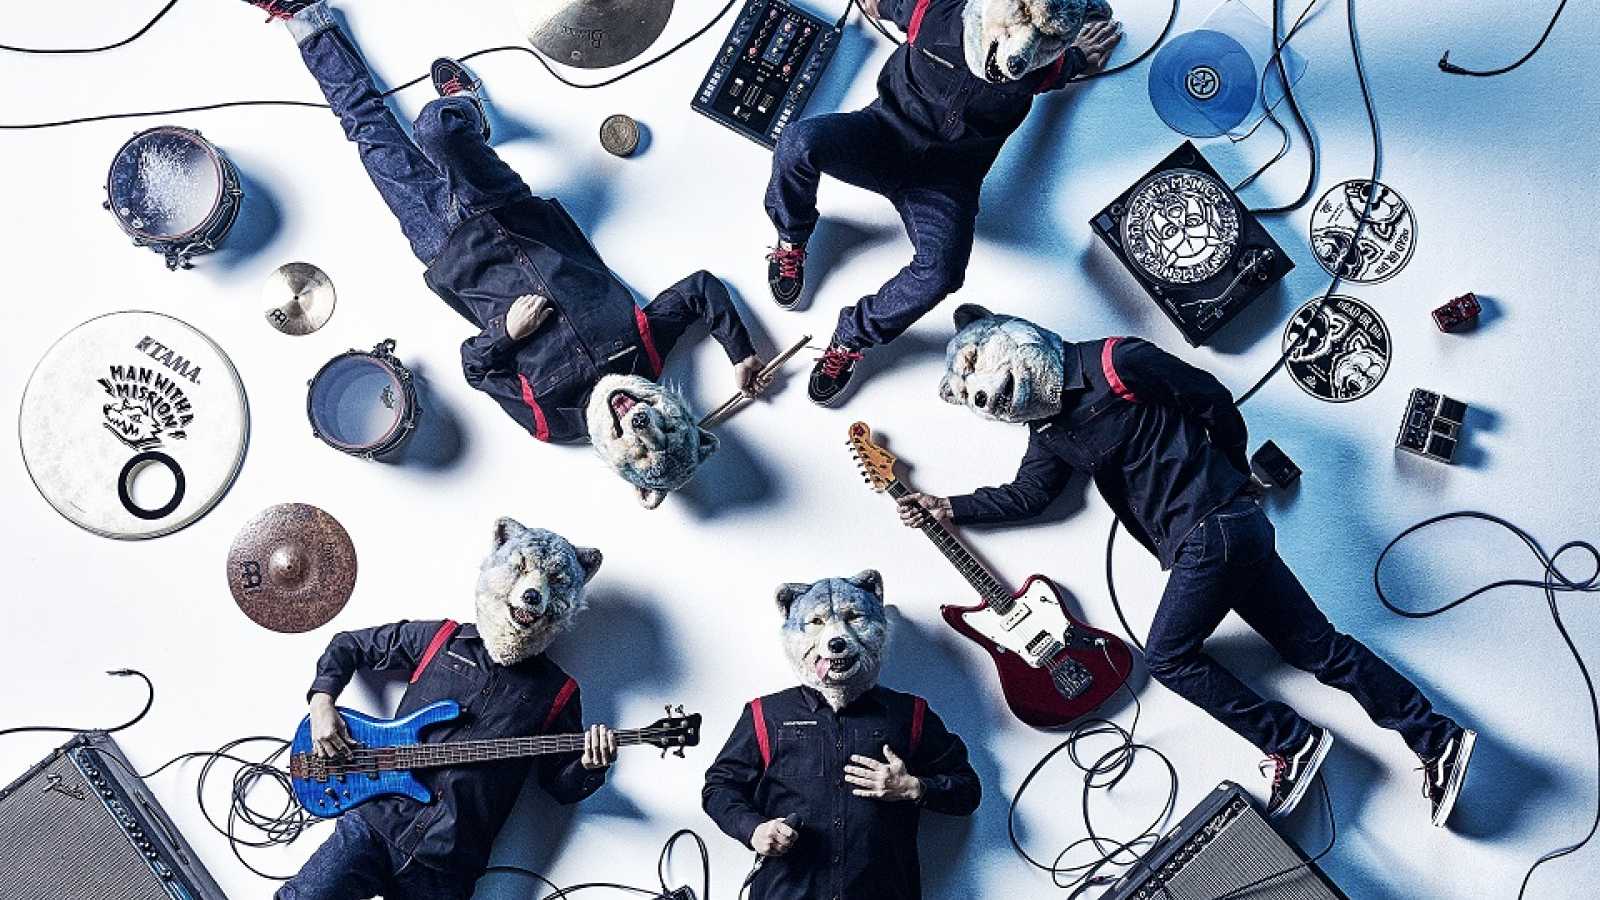 JaME's J-rock Playlist © MAN WITH A MISSION. All rights reserved.